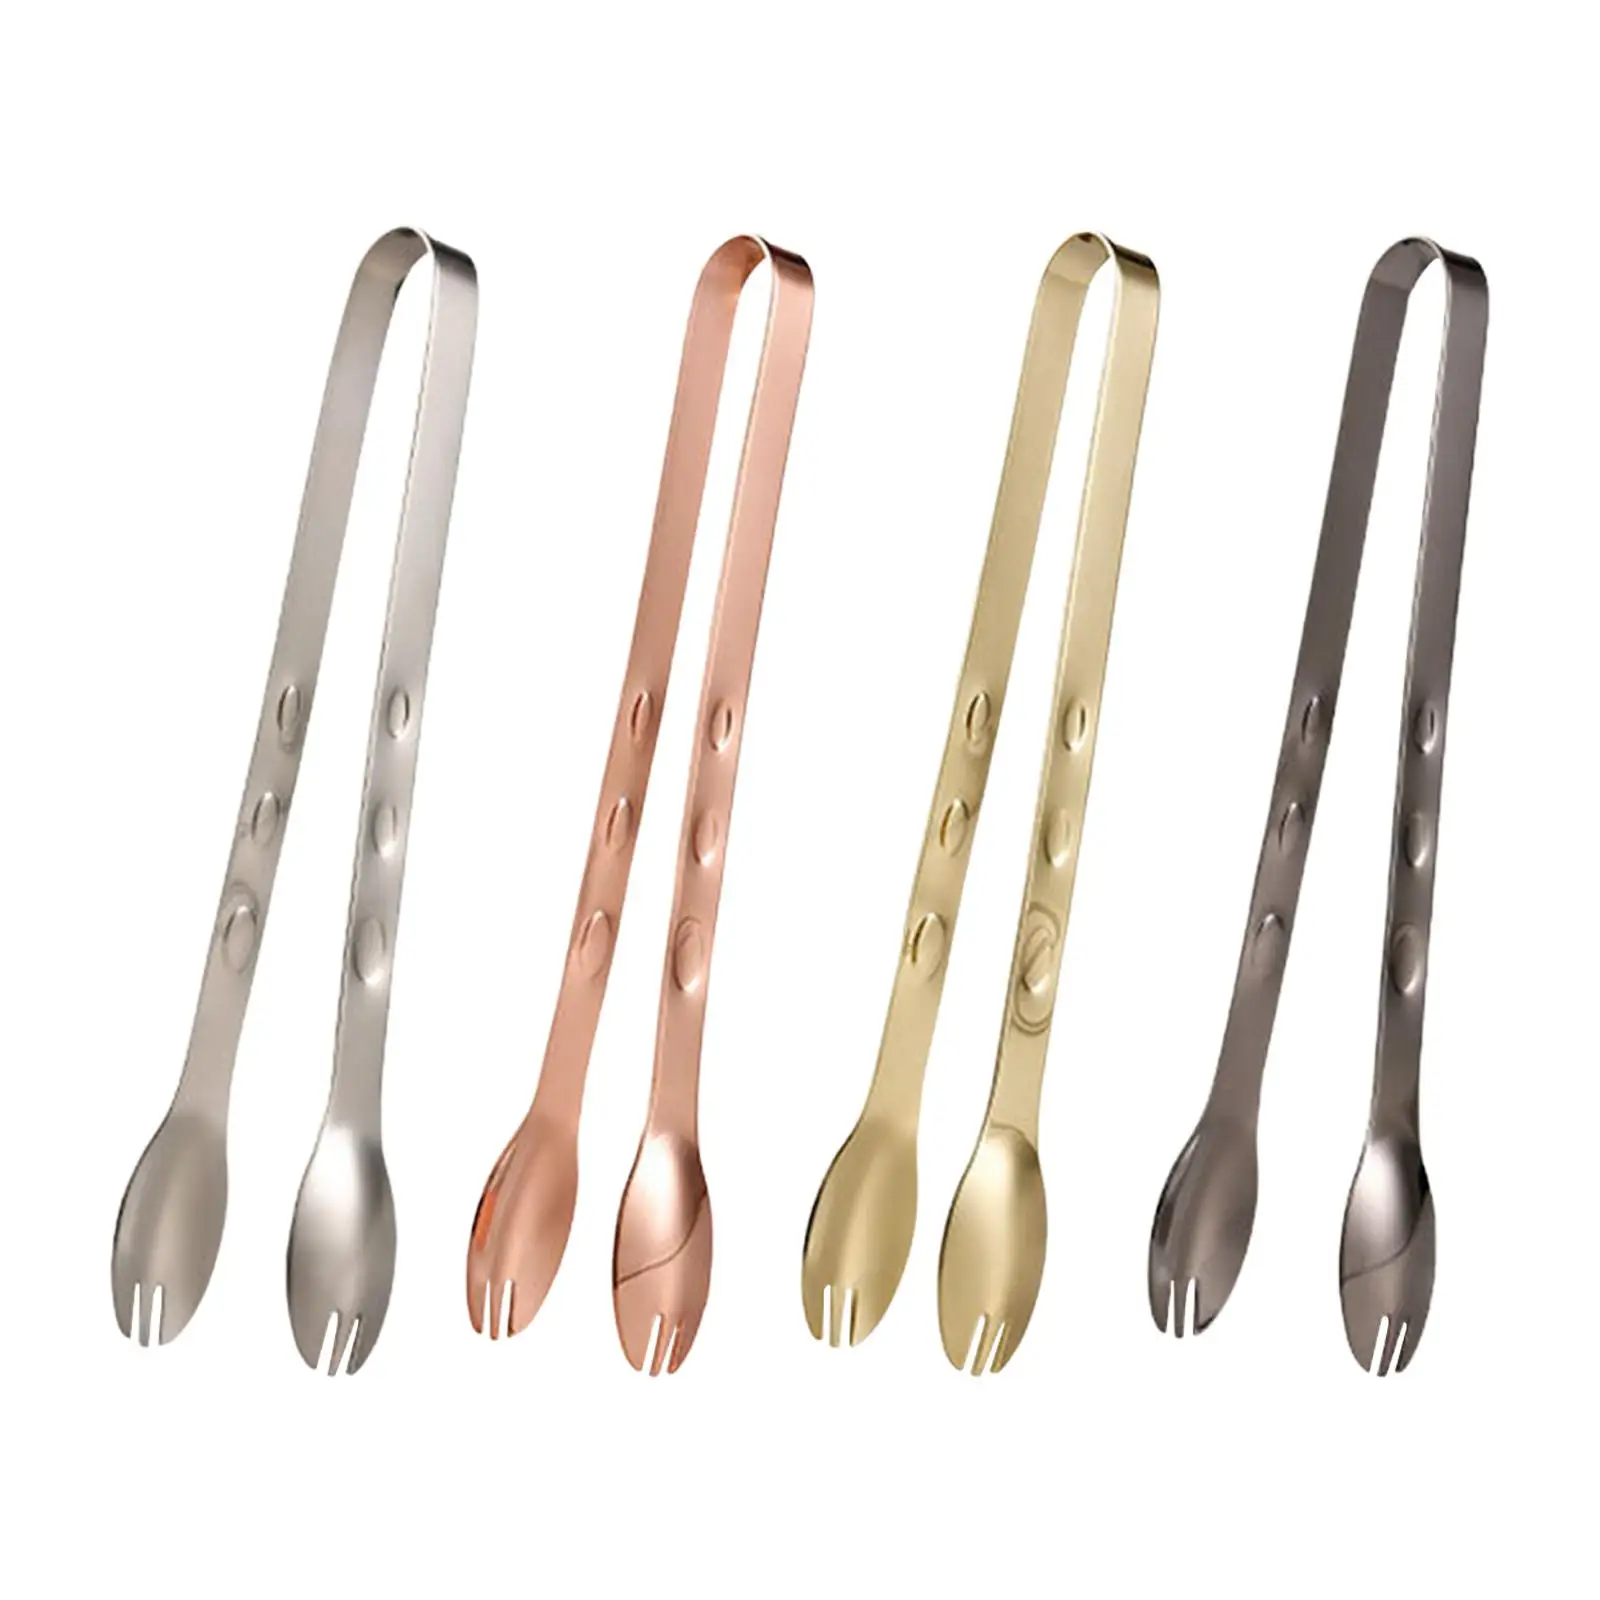 Sugar Tongs Reusable Food Clip Pastry Clamp Barbecue Clip Bread Clip Small Tongs Ice Tongs for Restaurant Bar Party Kitchen